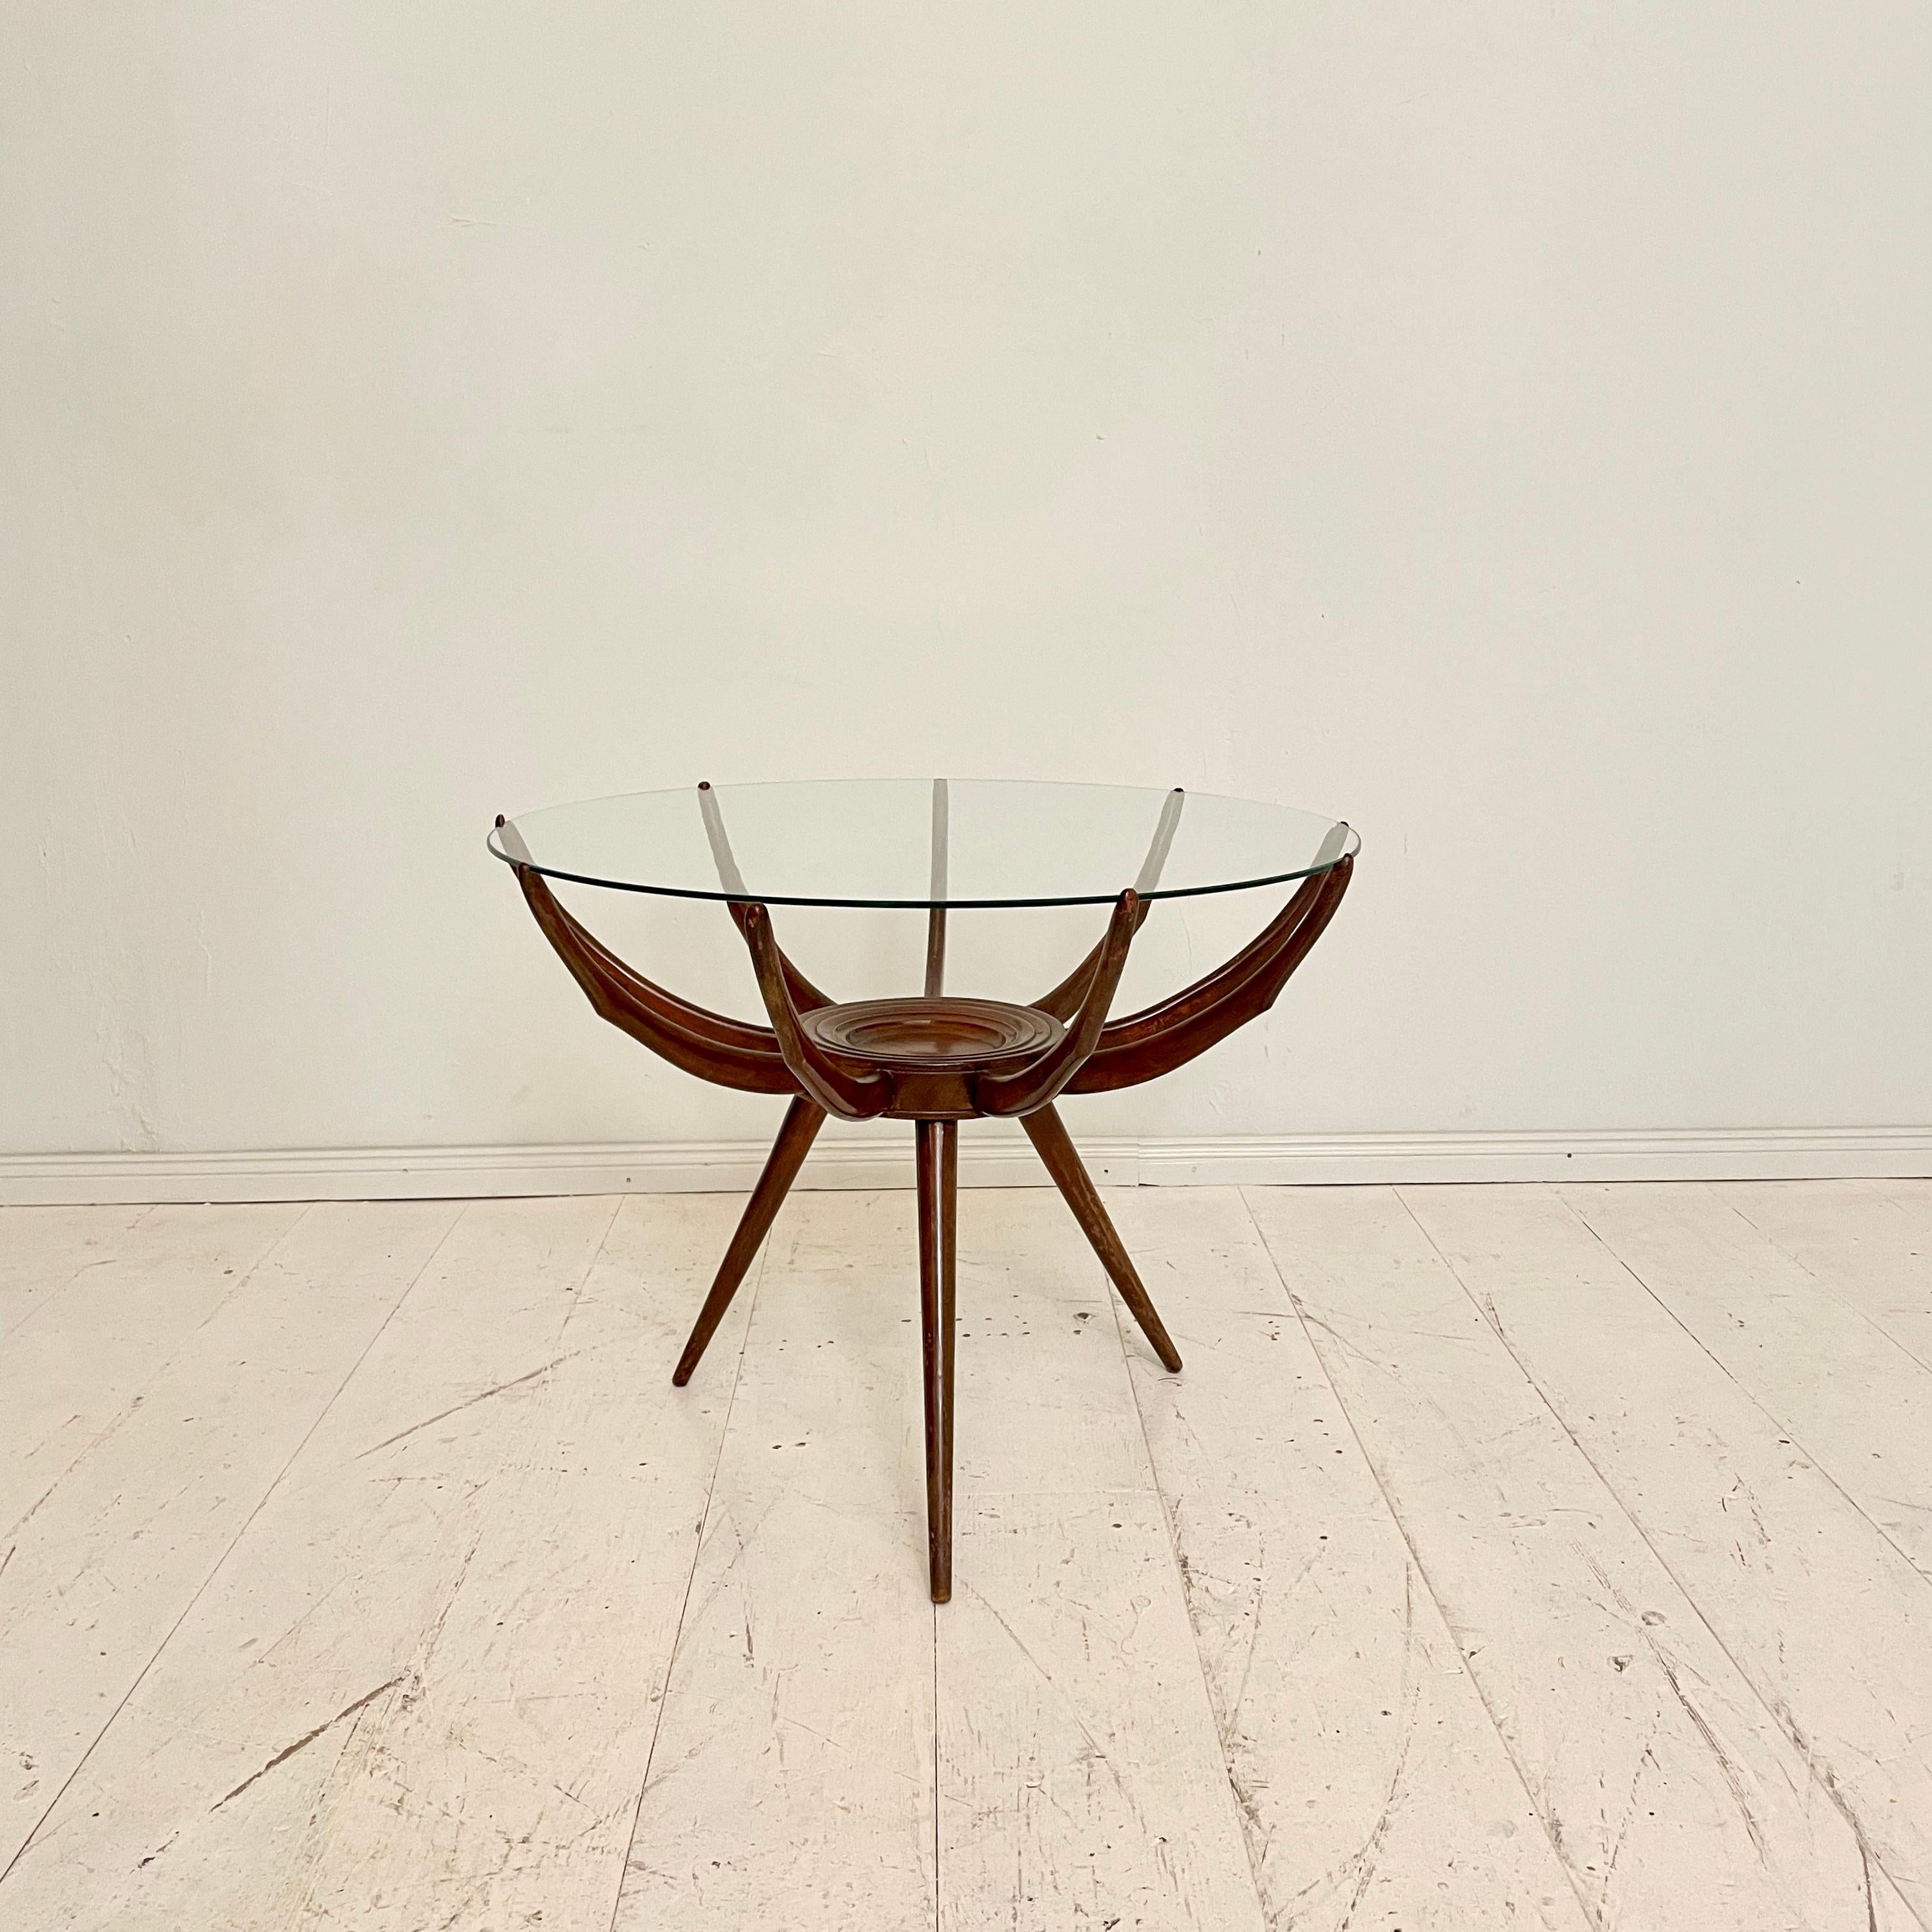 This beautiful mid century Italian spider leg coffee table by Carlo de Carli, was made around 1950.
The structure of the table reminds of inset legs, therefore the name 'Ragno' or Spider Table.
A unique piece which is a great eye-catcher for your